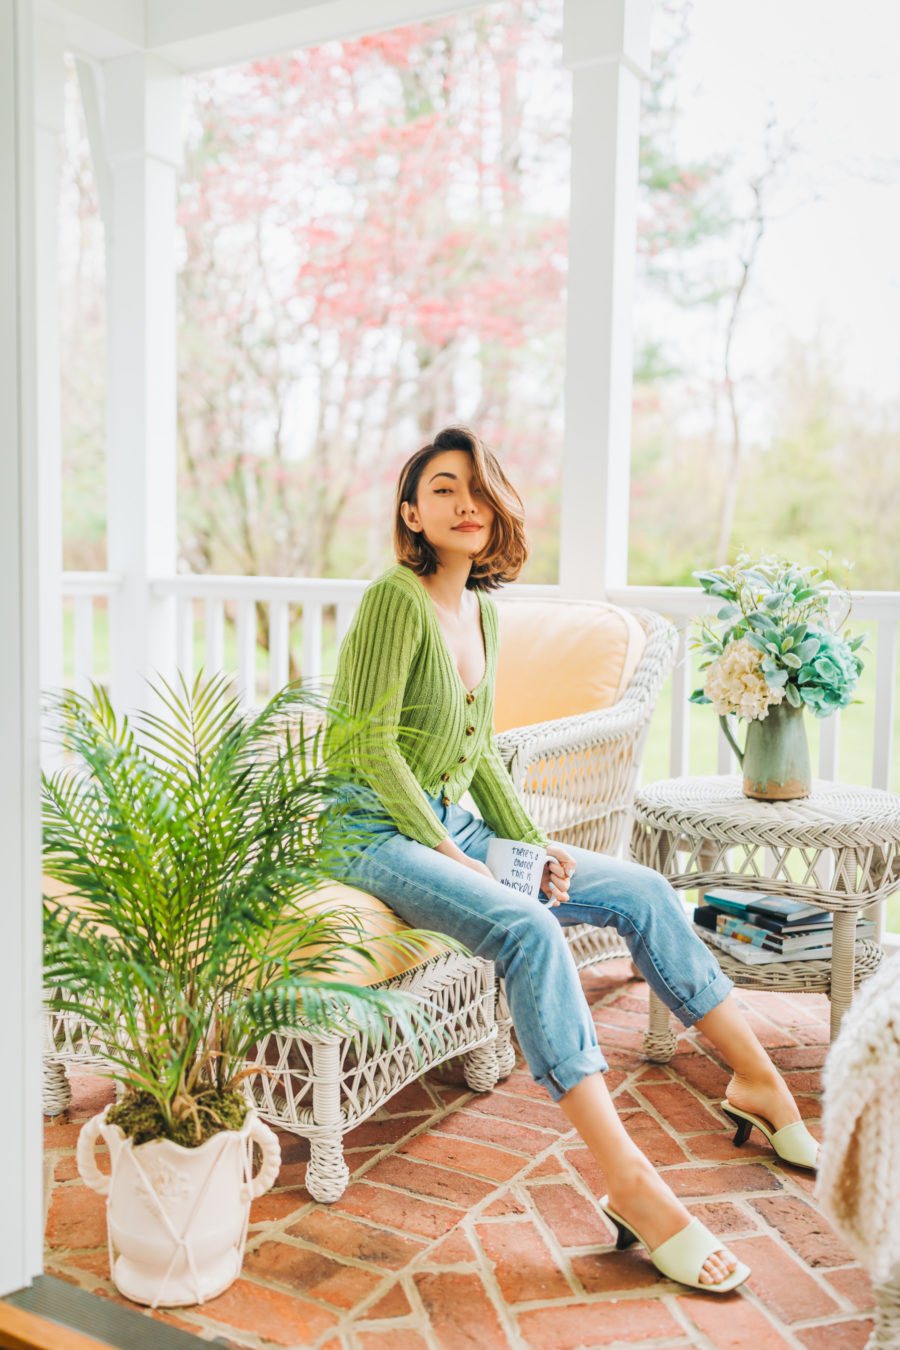 fashion blogger jessica wang wears green cardigan and shares tips to help you manage anxiety and stress // Jessica Wang - Notjessfashion.com